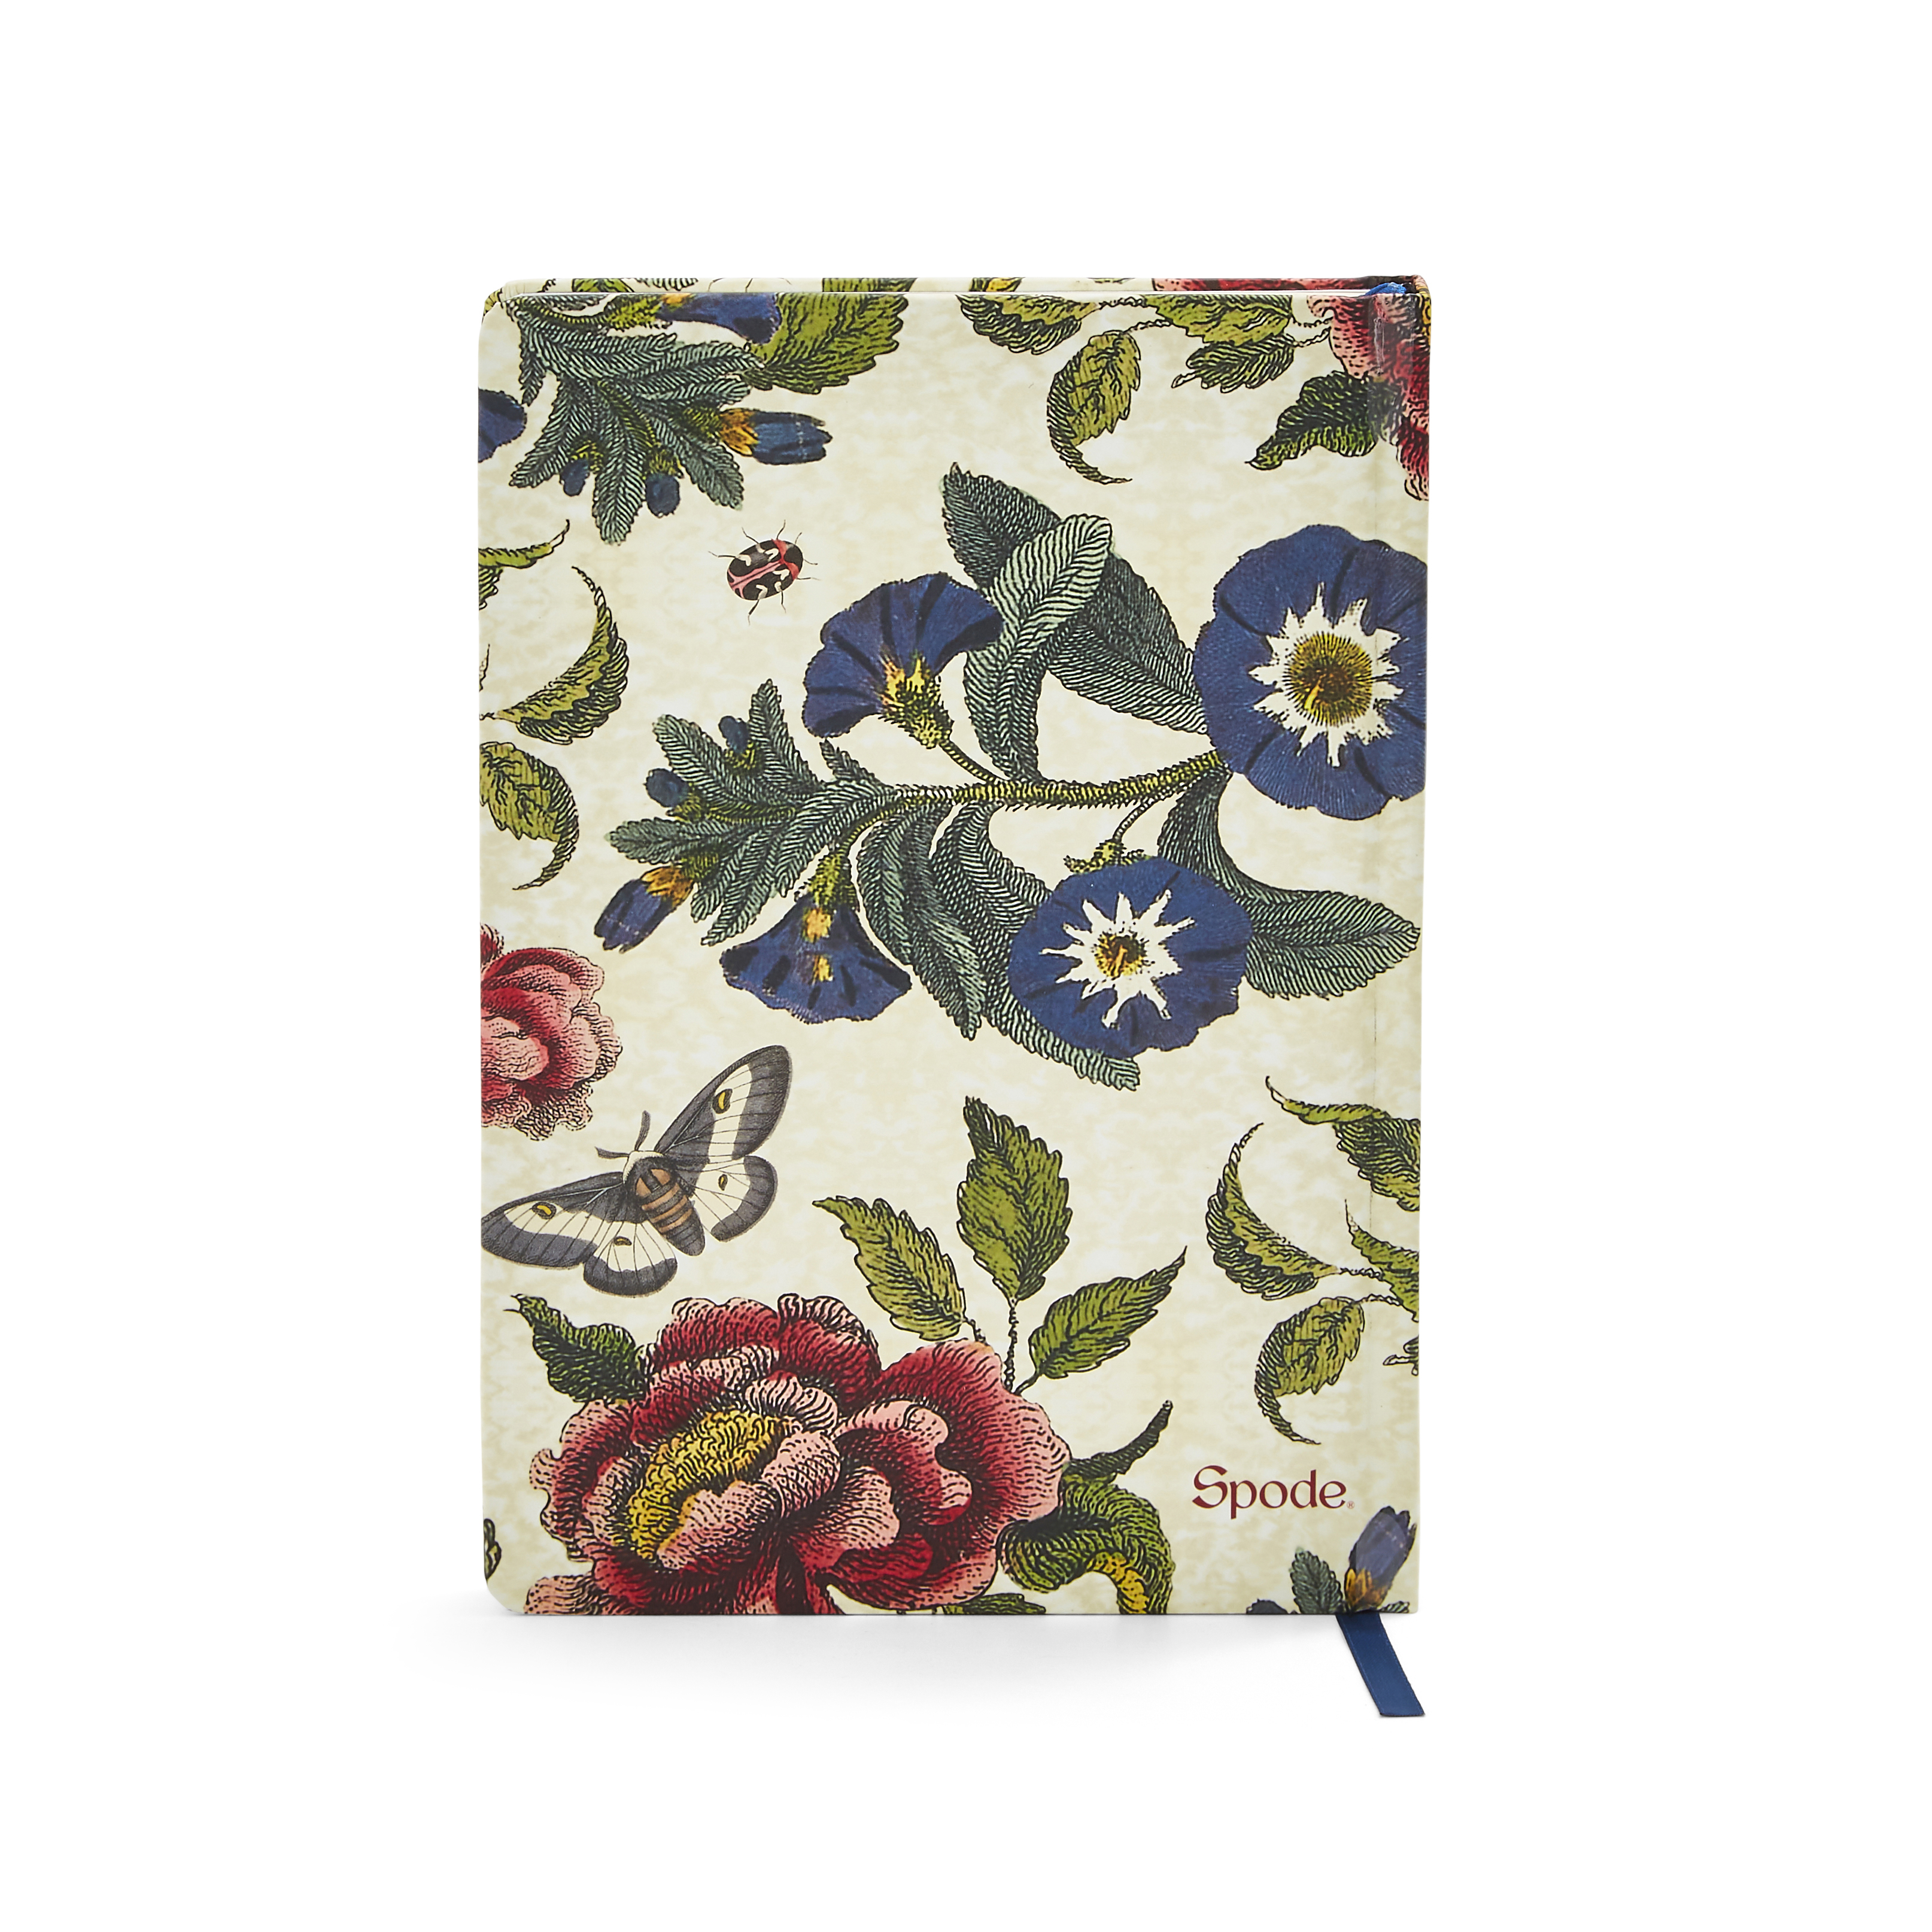 Creatures of Curiosity Floral Notebook (5.8" x 8.3") image number null